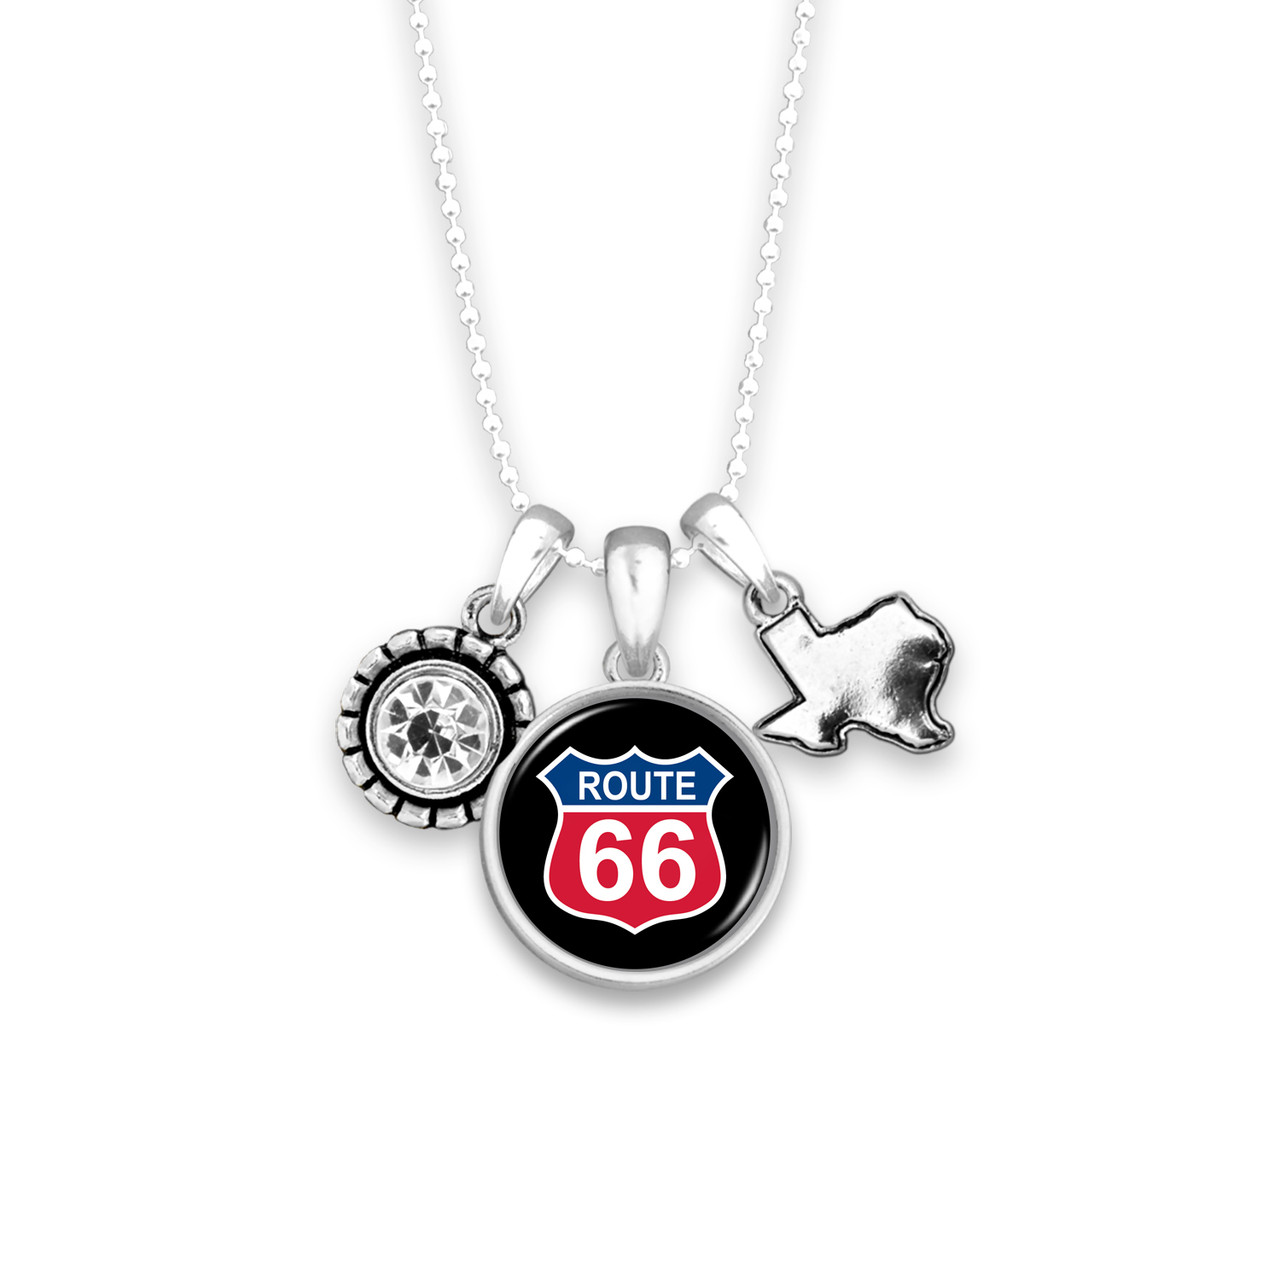 Route 66 Home Sweet School Necklace - Texas